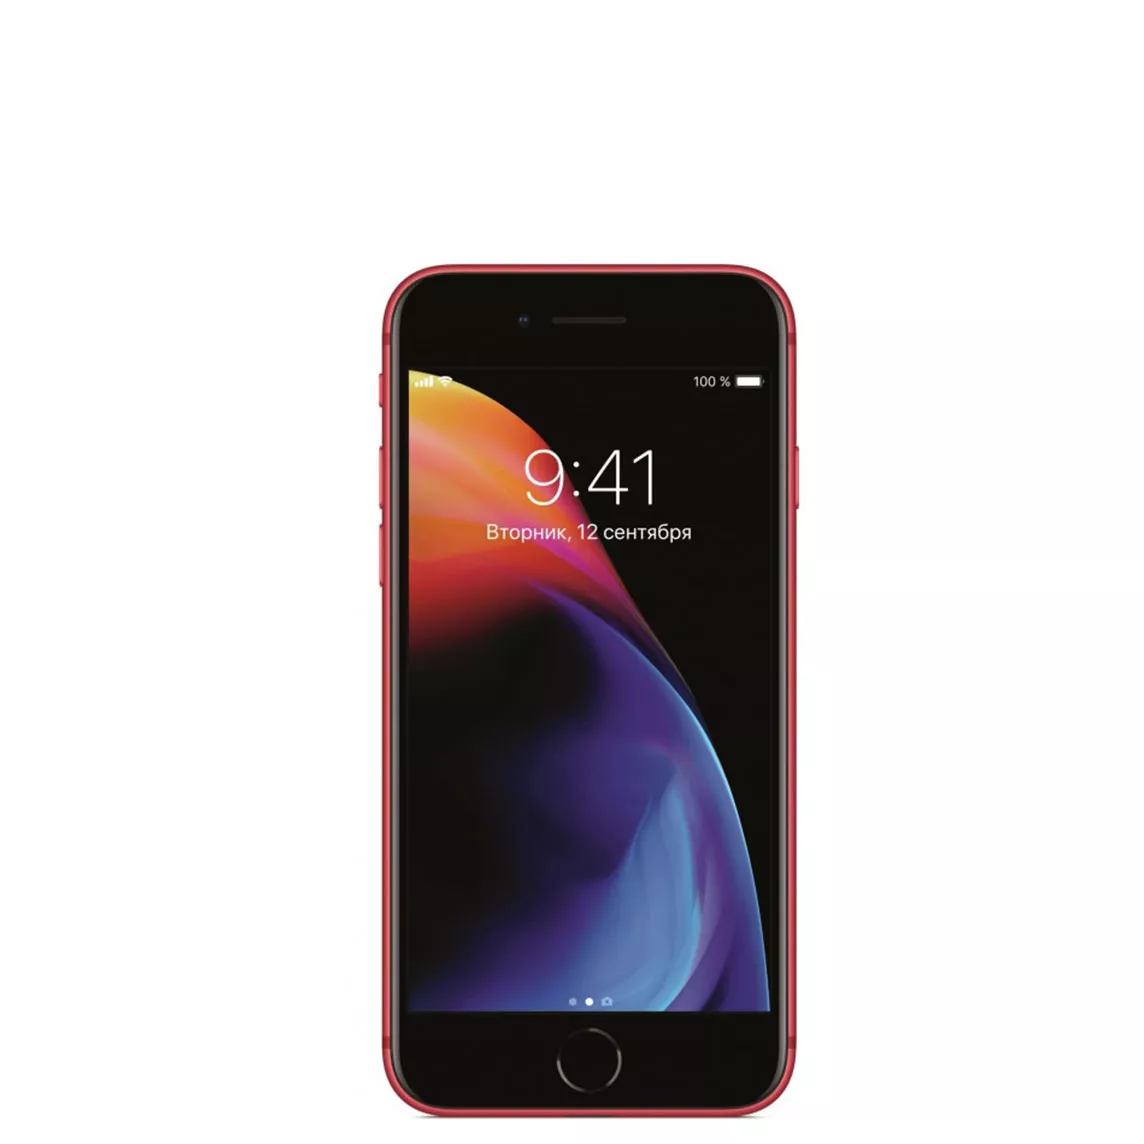 Apple iPhone 8 256ГБ (PRODUCT)RED Special Edition. Вид 1